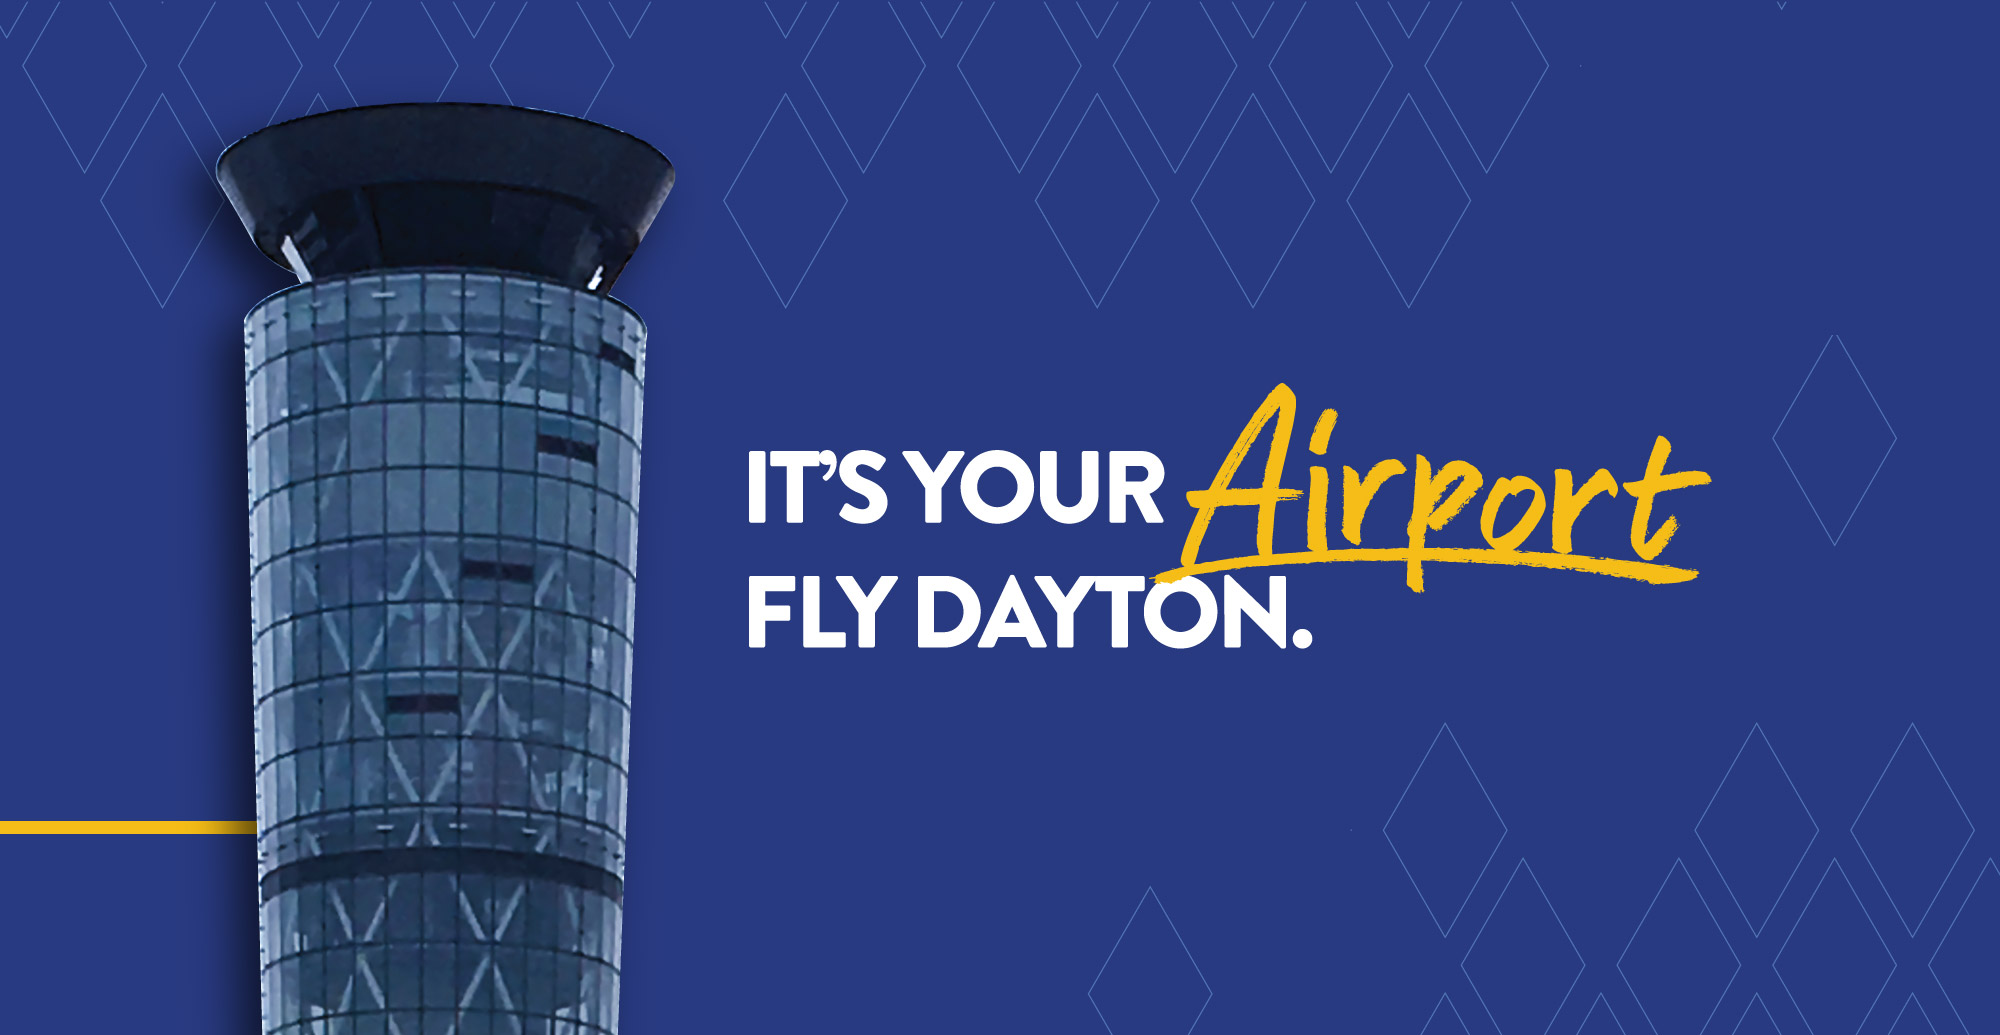 It's your airport. Fly Dayton.